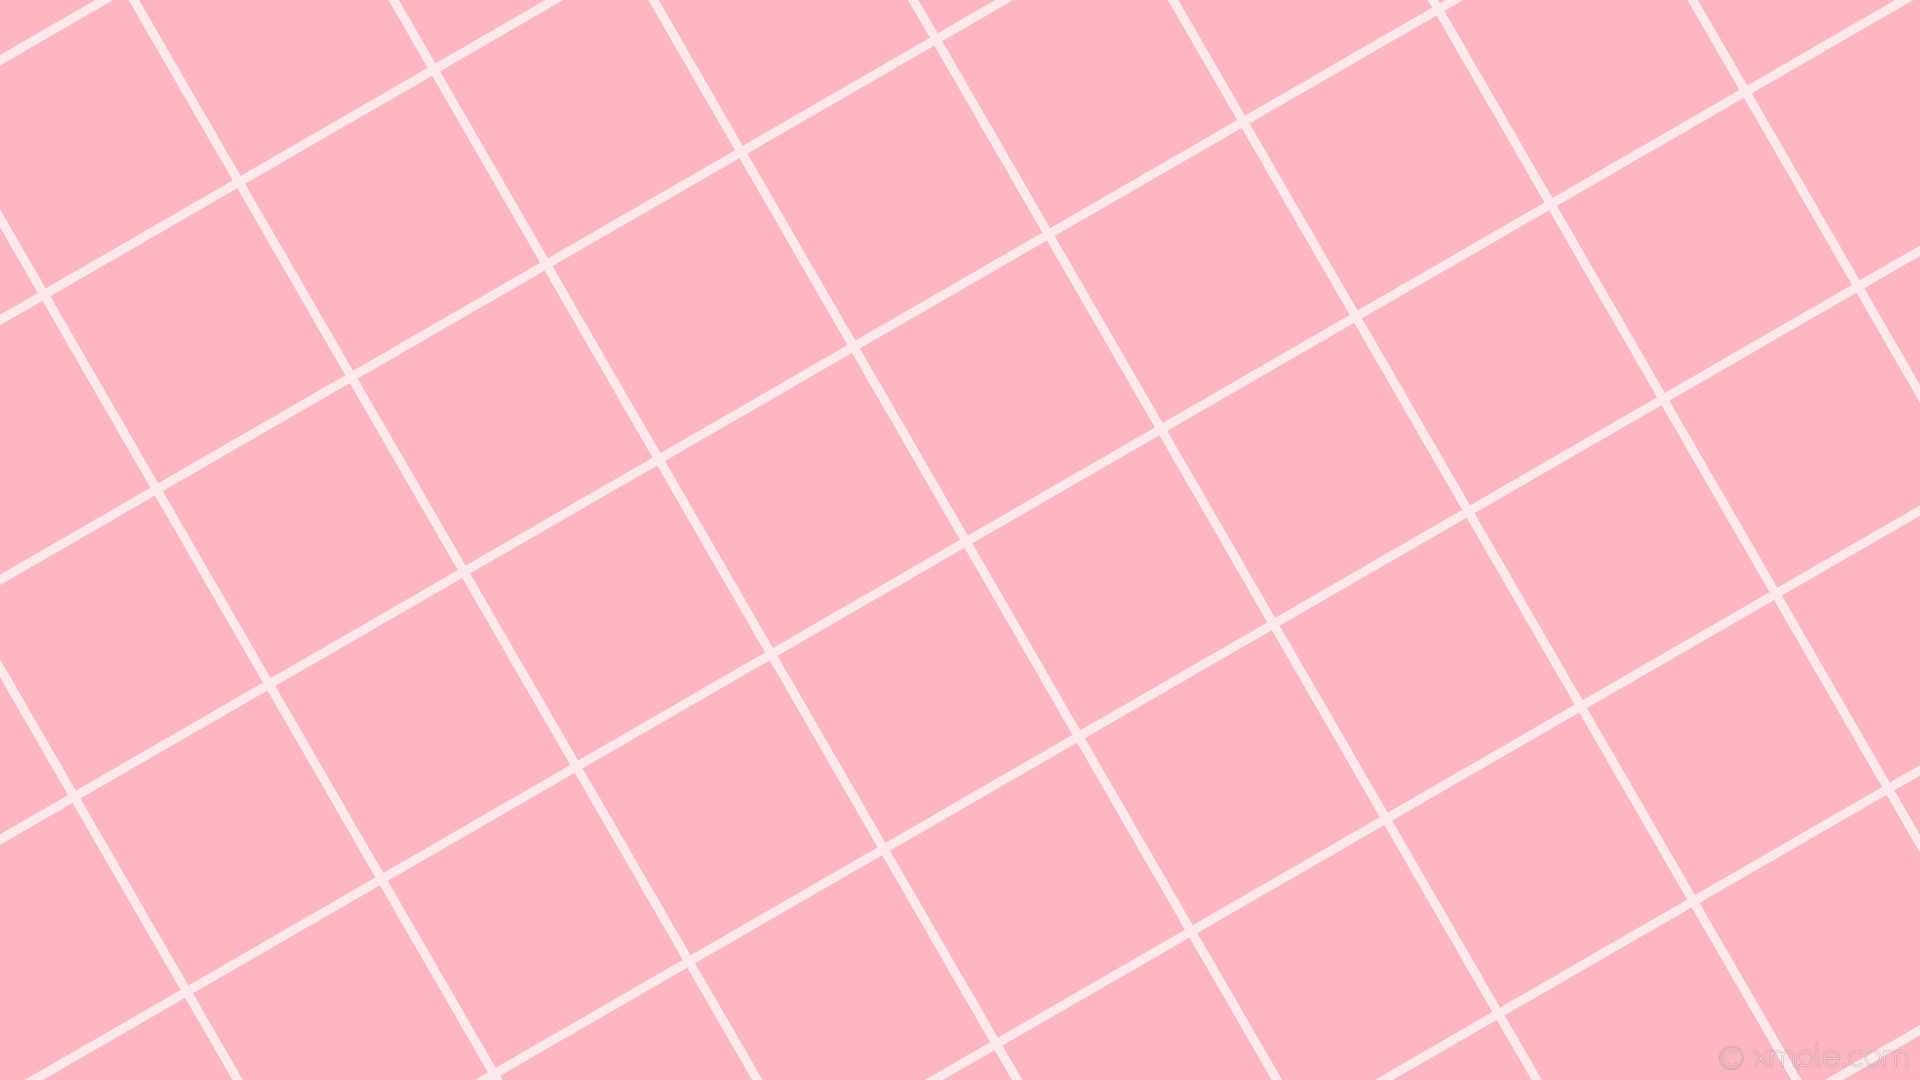 Enjoy this adorable pink background that is perfect for any day